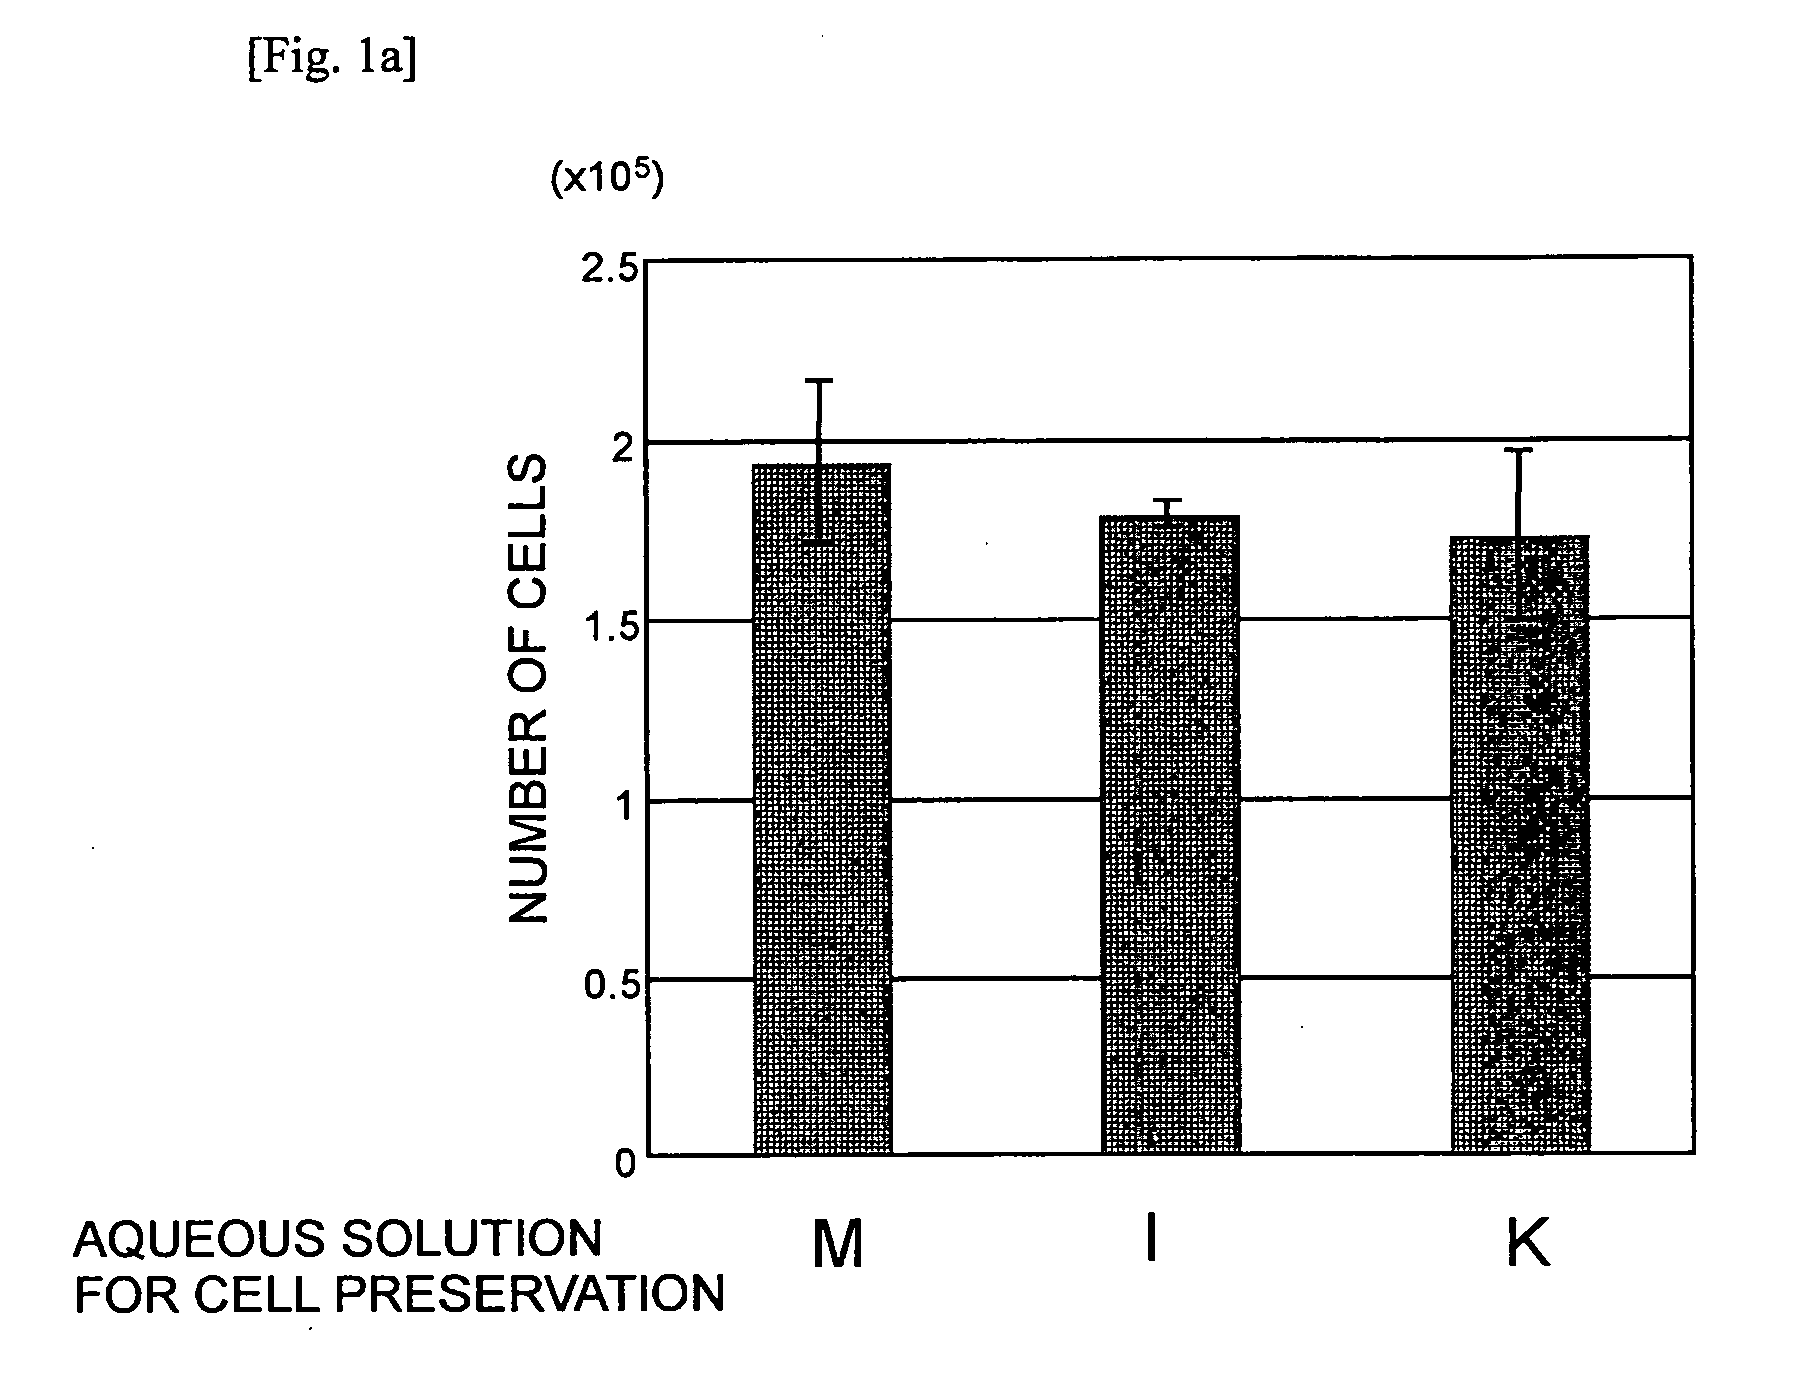 Aqueous Solution for Cell Preservation